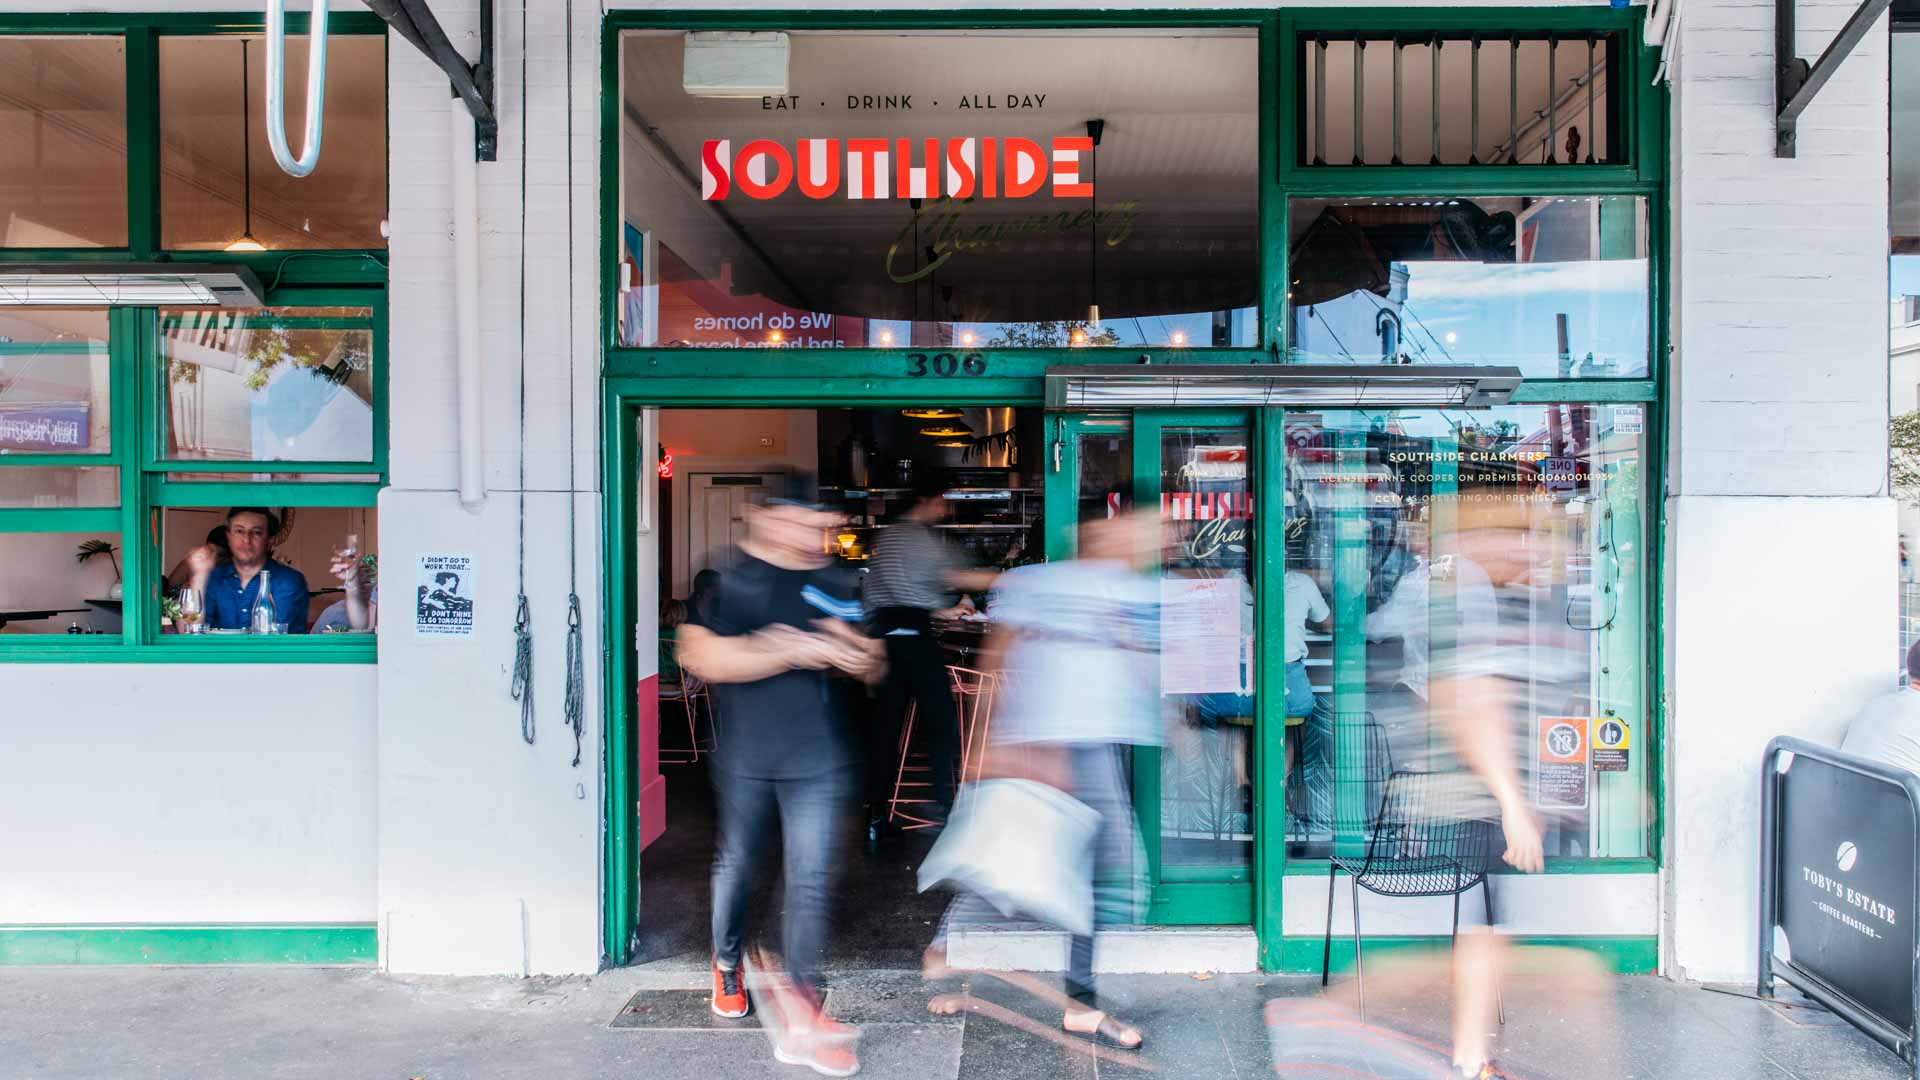 The Best Cafes for Working or Studying in Sydney